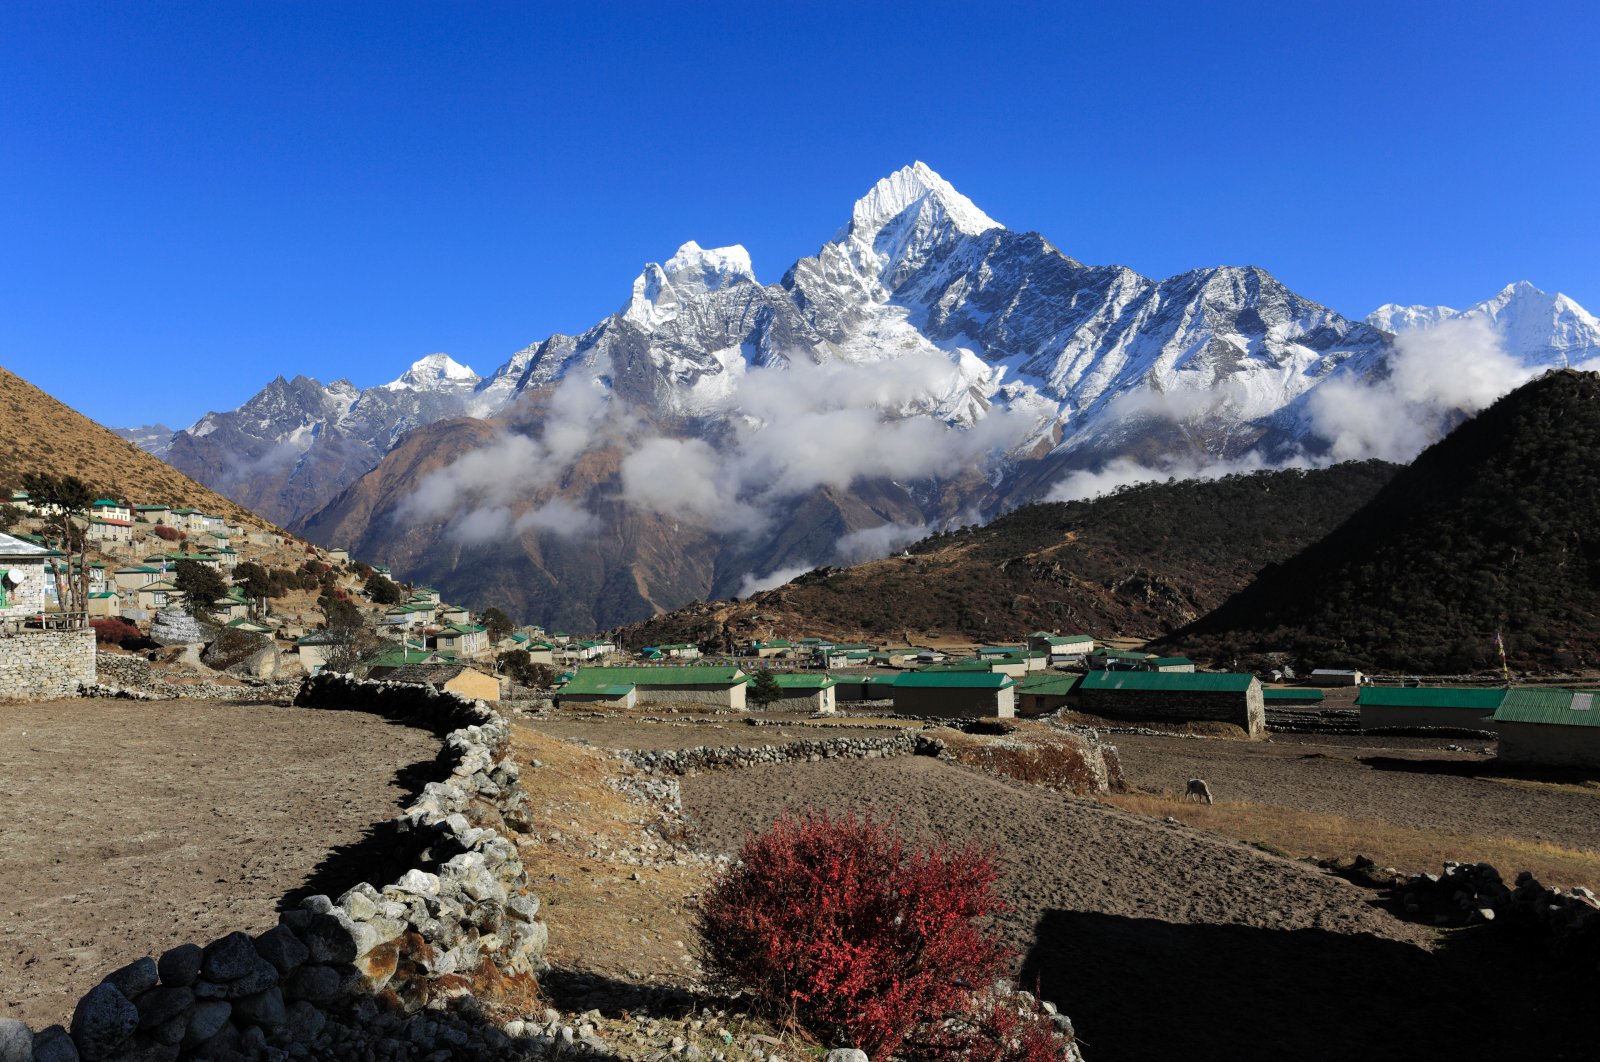 The Khumjung village is seen in the distance on the Everest base camp trek in the Solukhumbu district, Khumbu region, eastern Nepal, in this undated file photo. (Alamy Photo via Reuters)